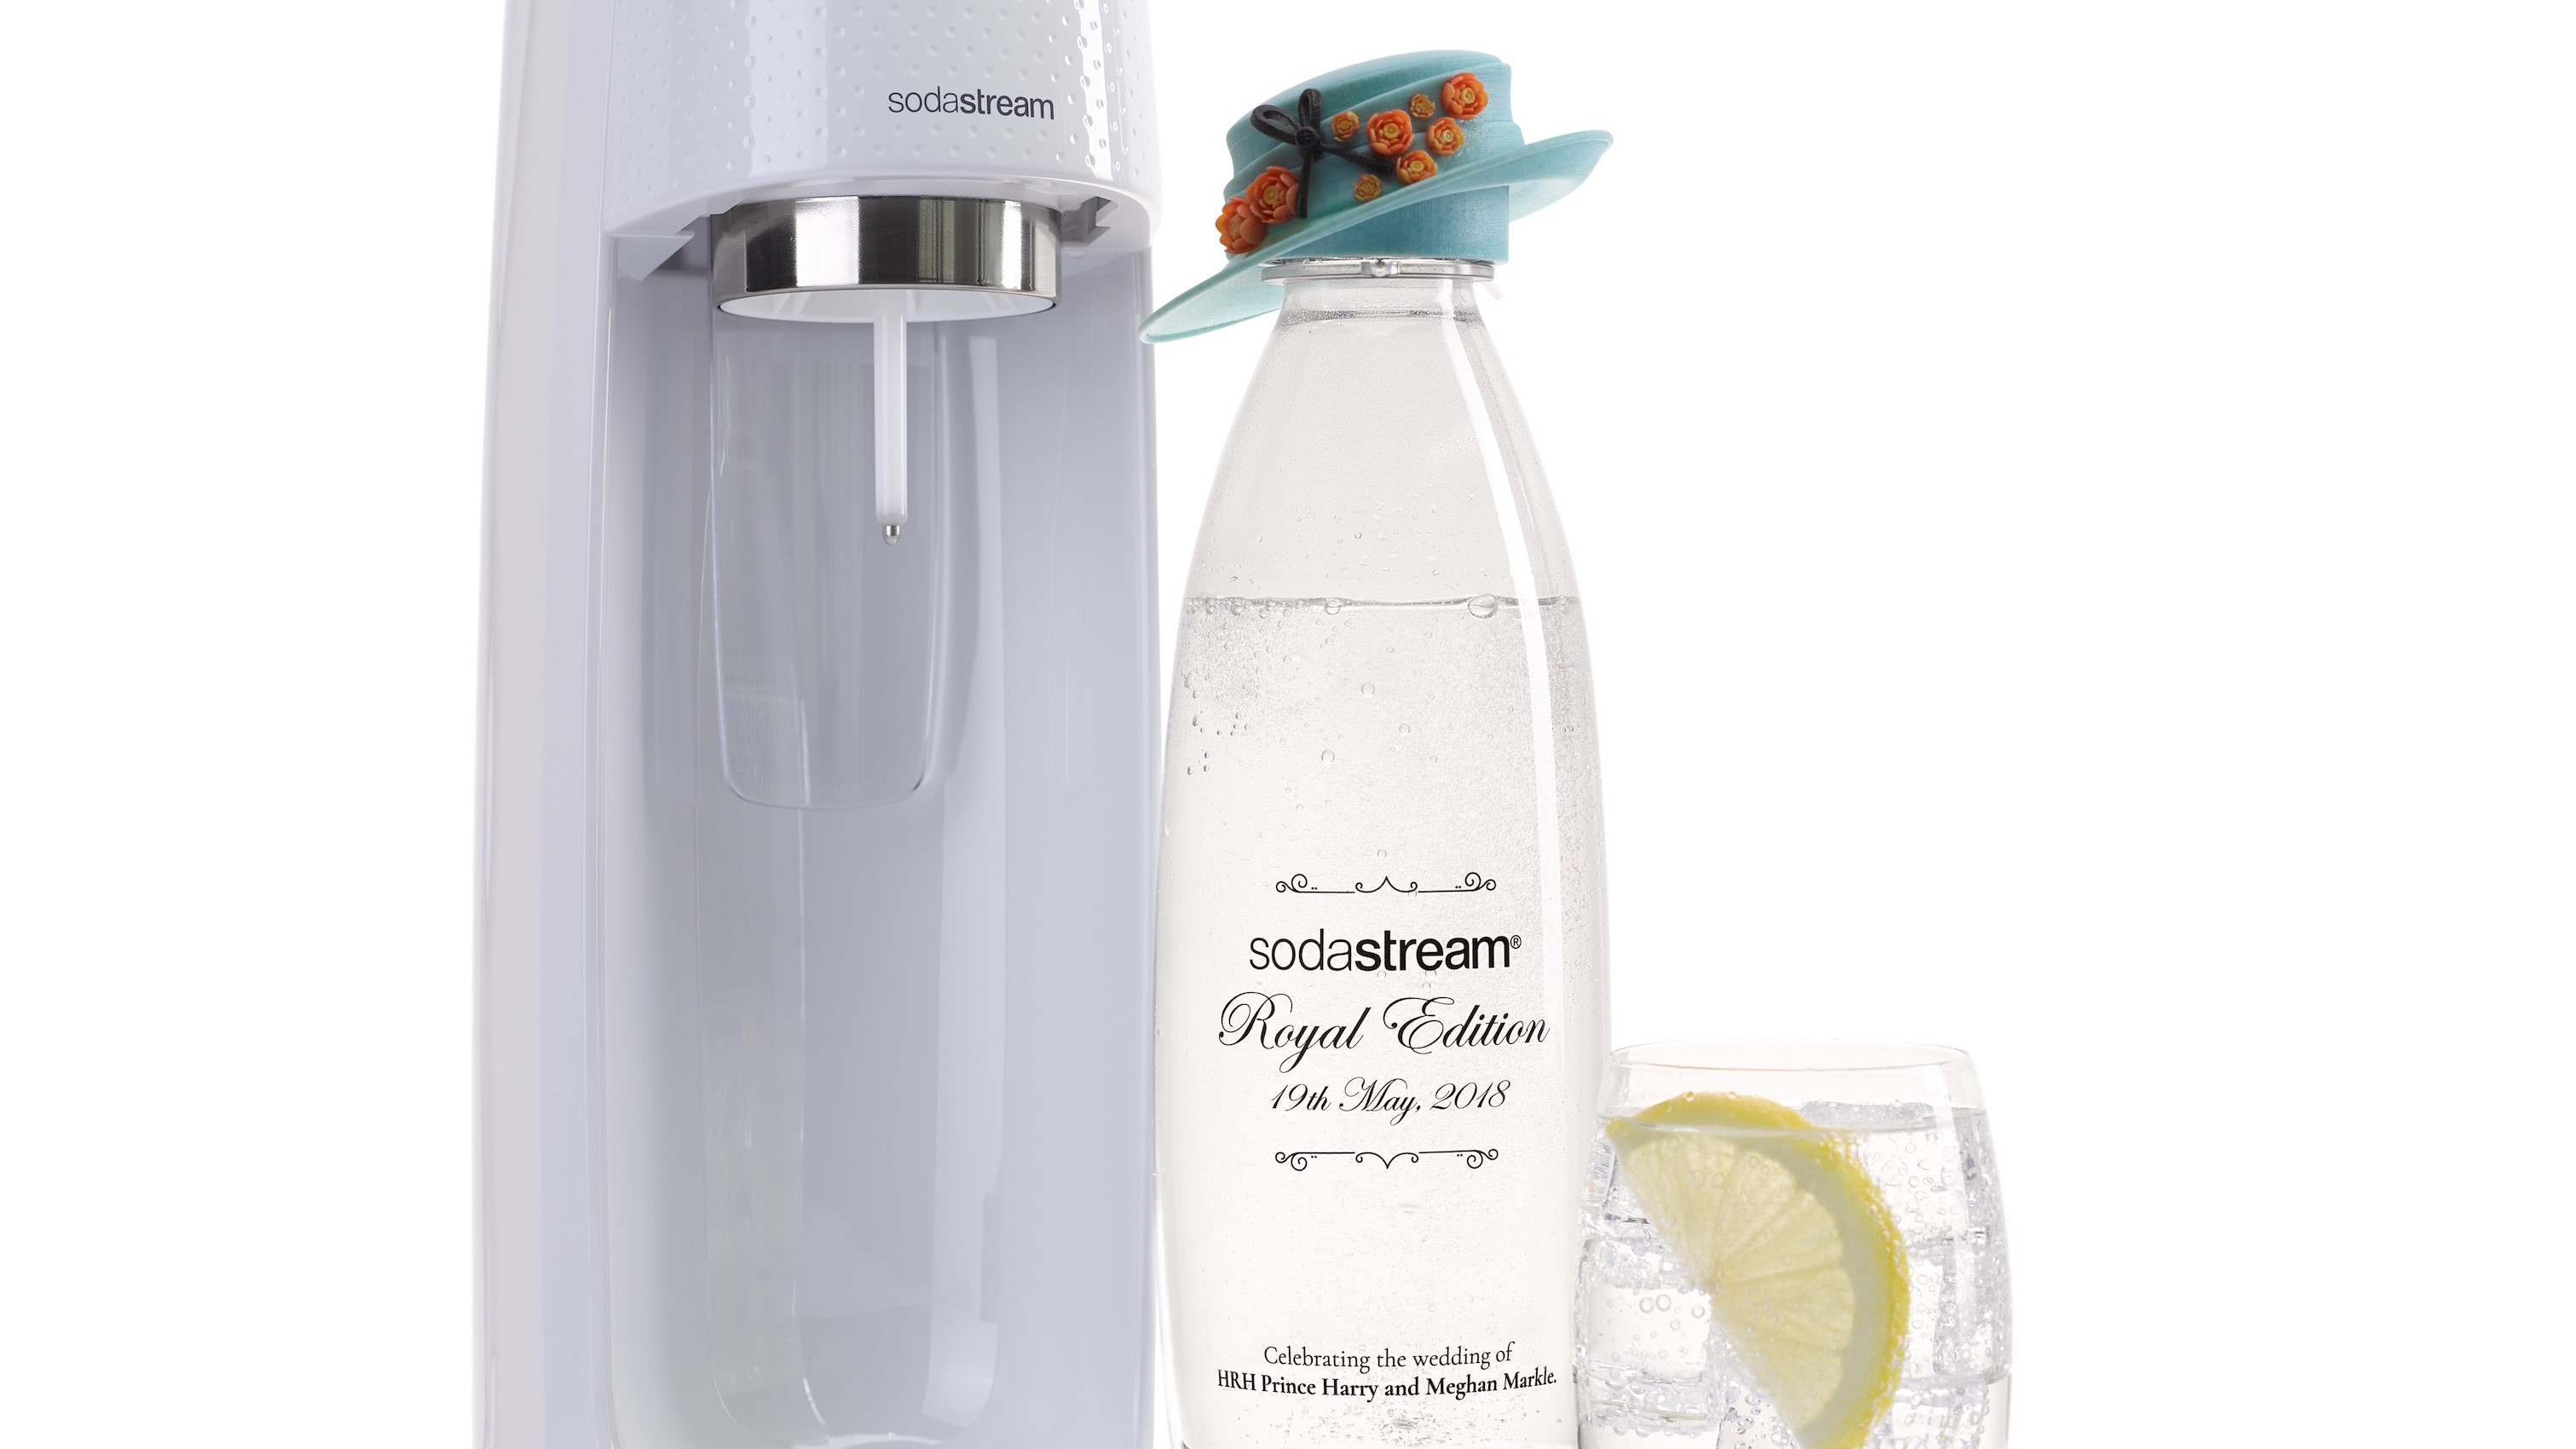 Sodastream Launches Limited Edition Royal Wedding Bottles To Combat Pollution photo